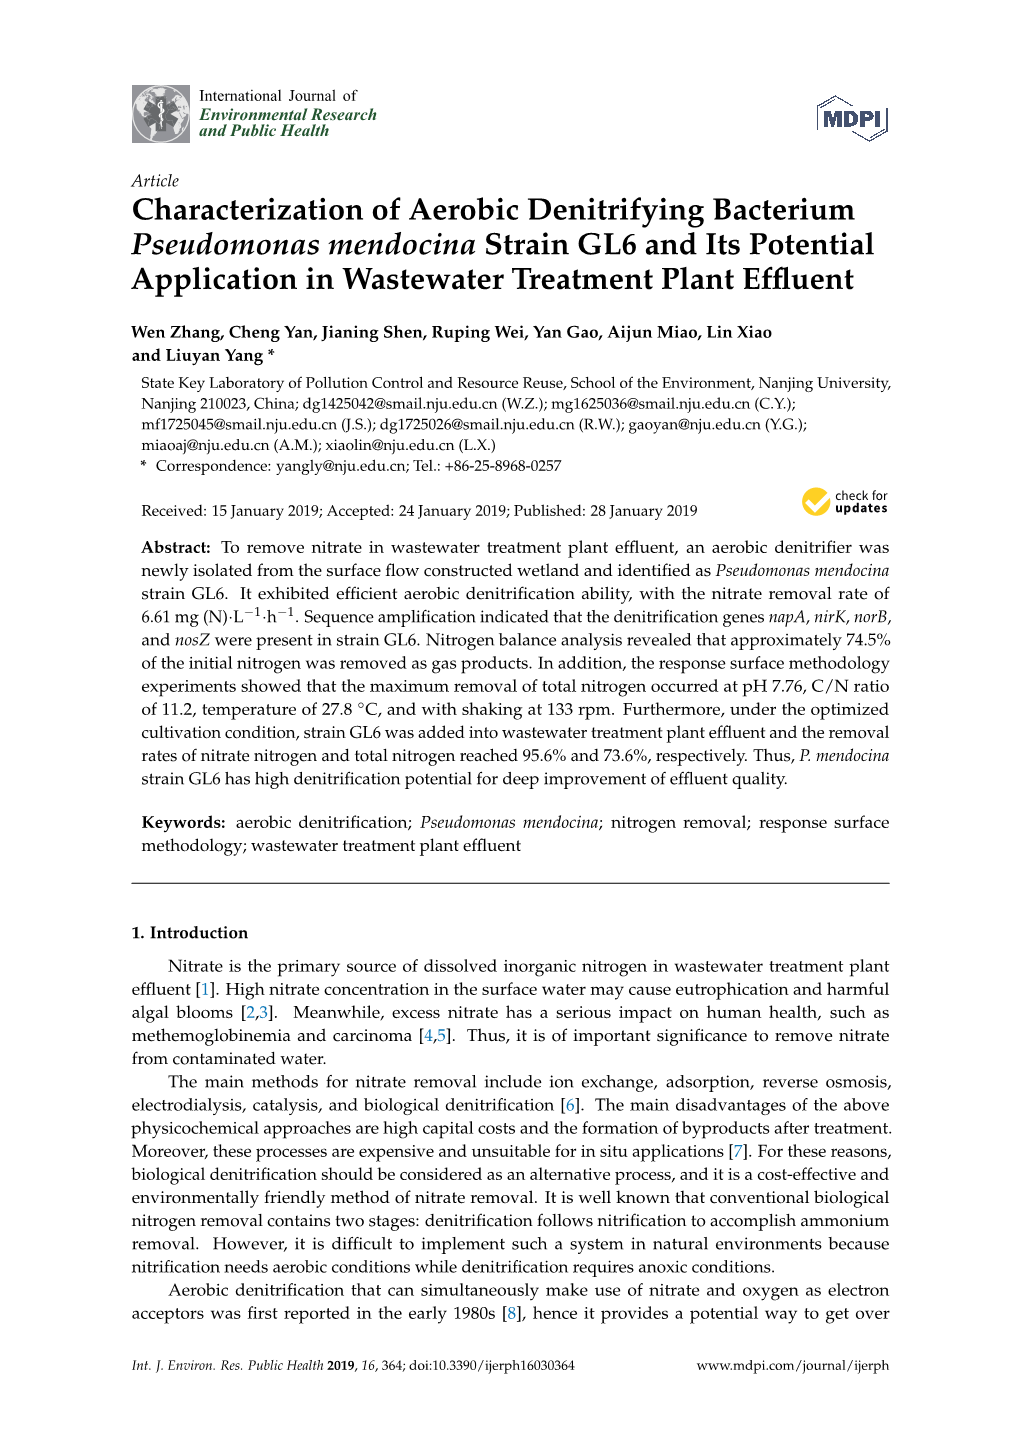 Characterization of Aerobic Denitrifying Bacterium Pseudomonas Mendocina Strain GL6 and Its Potential Application in Wastewater Treatment Plant Efﬂuent